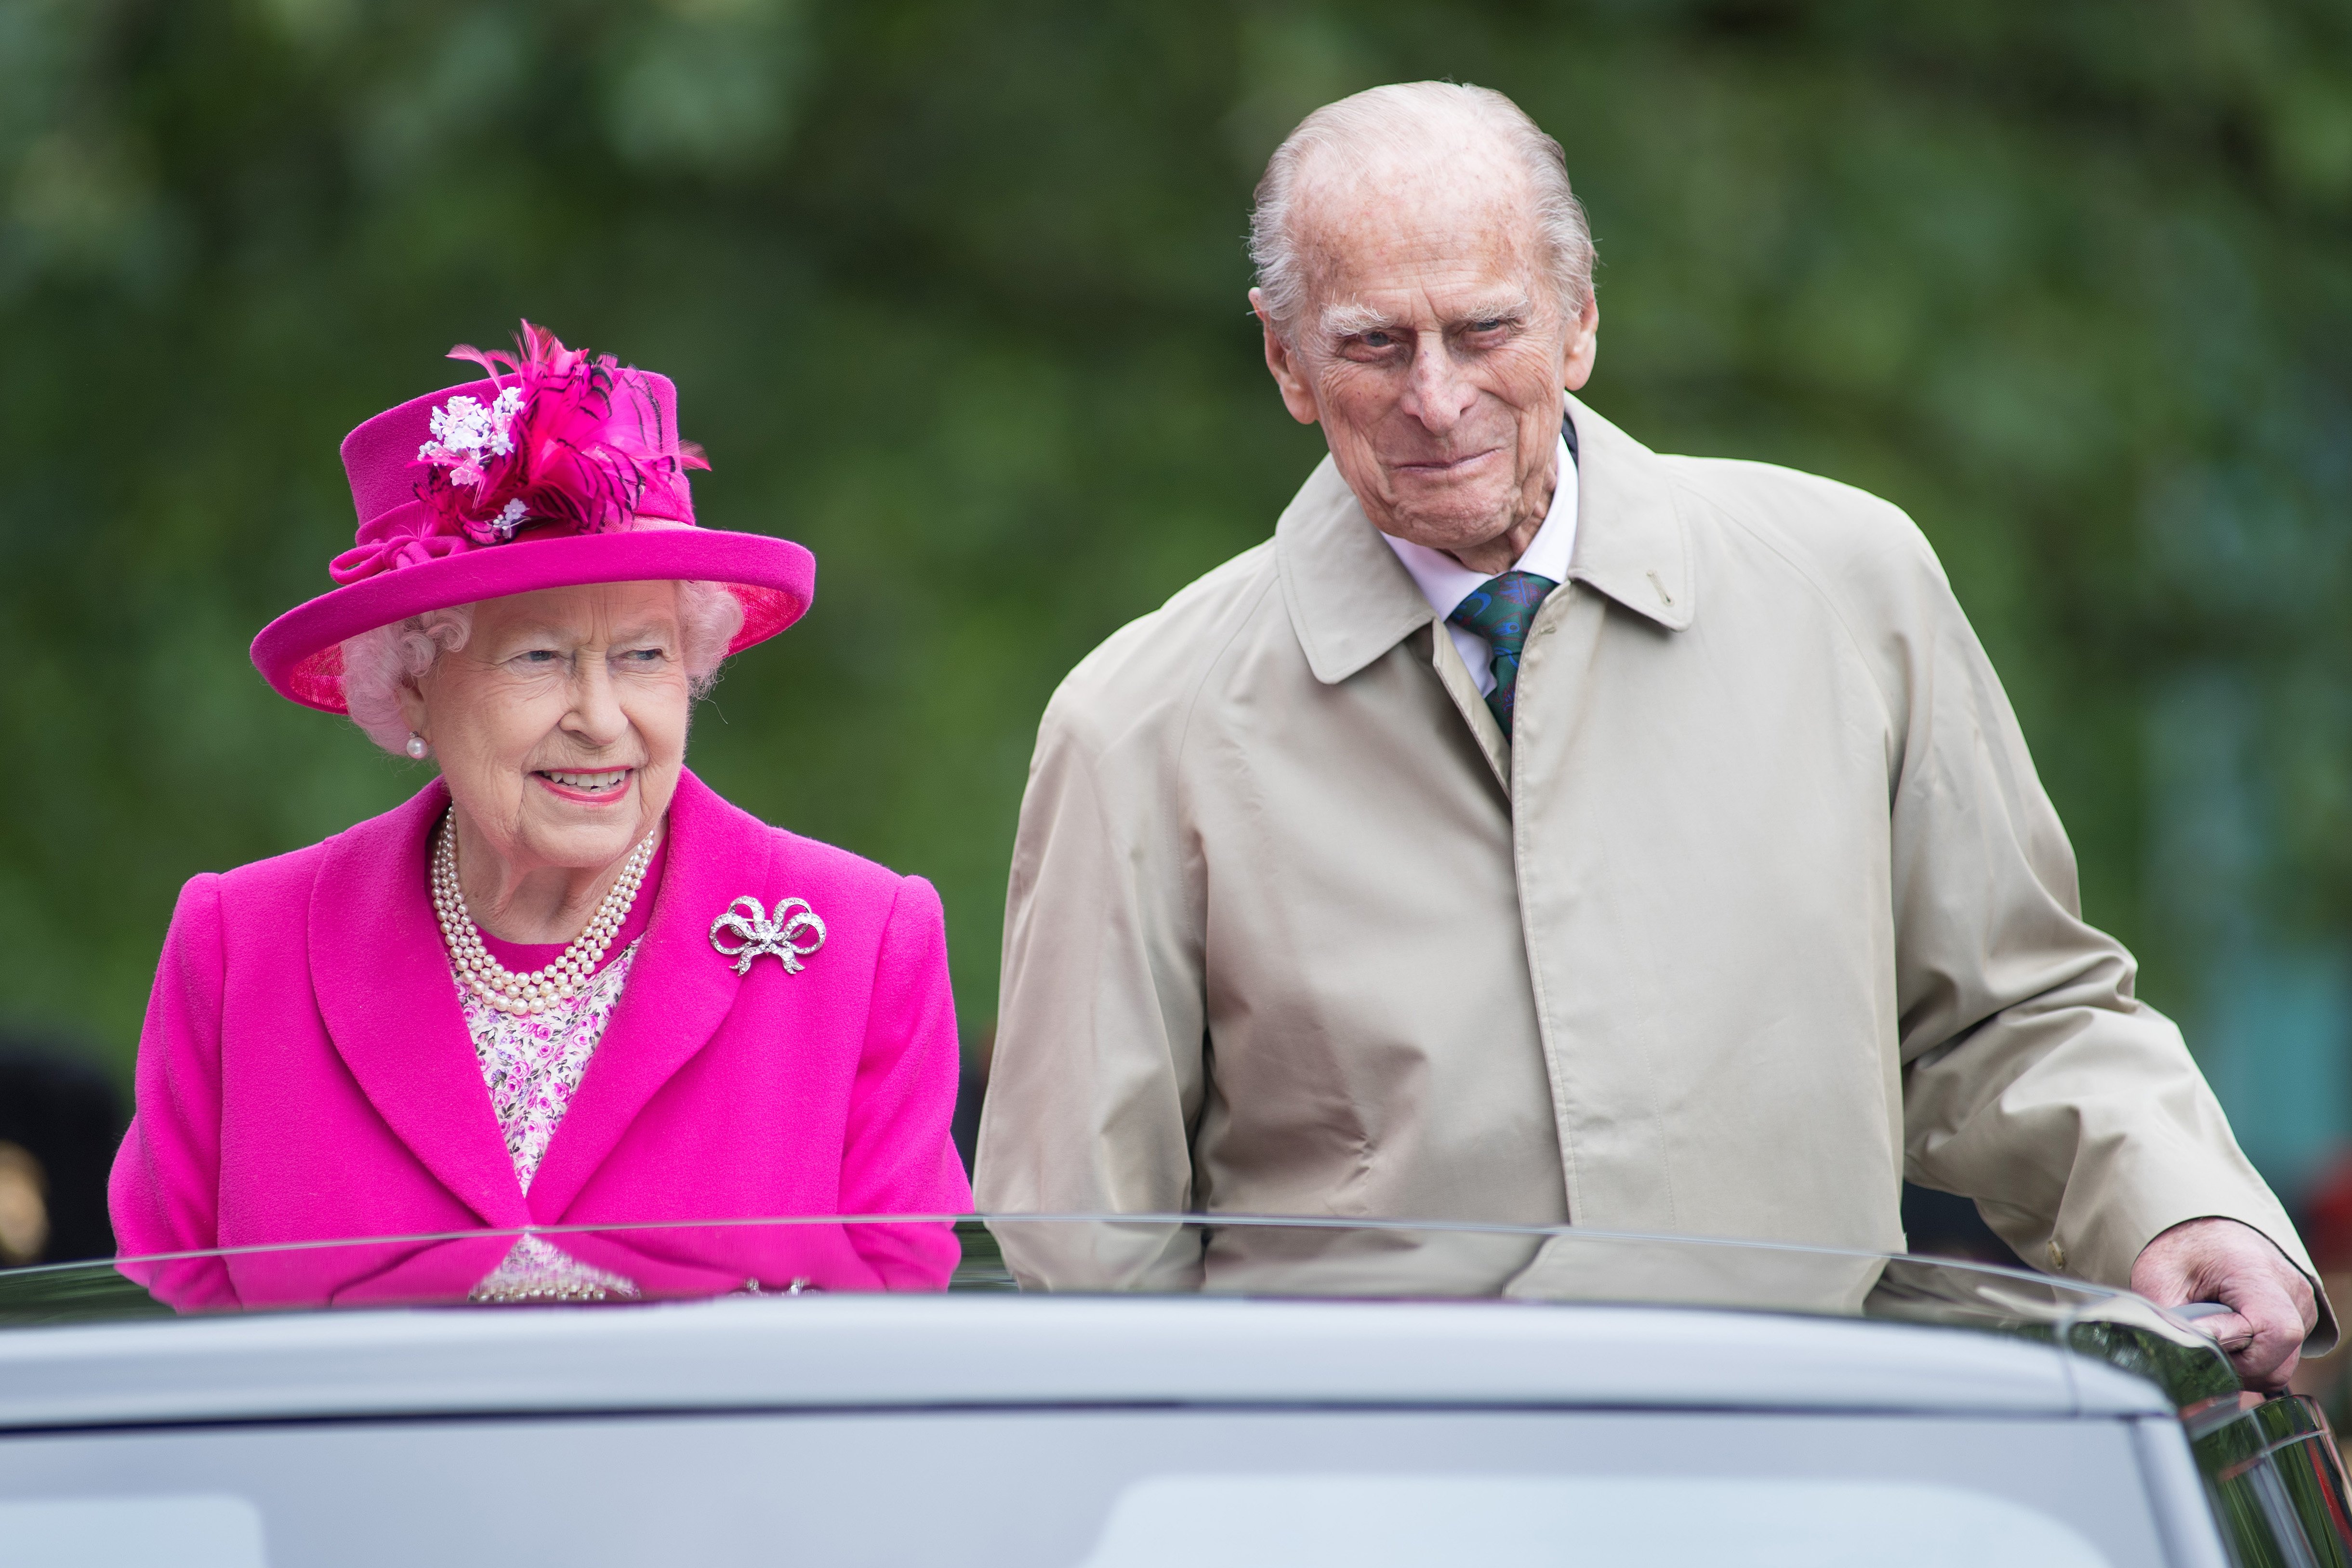 Queen Elizabeth II and Prince Philip at "The Patron's Lunch" celebrations for her 90th birthday on June 12, 2016, in London, England | Source: Getty Images